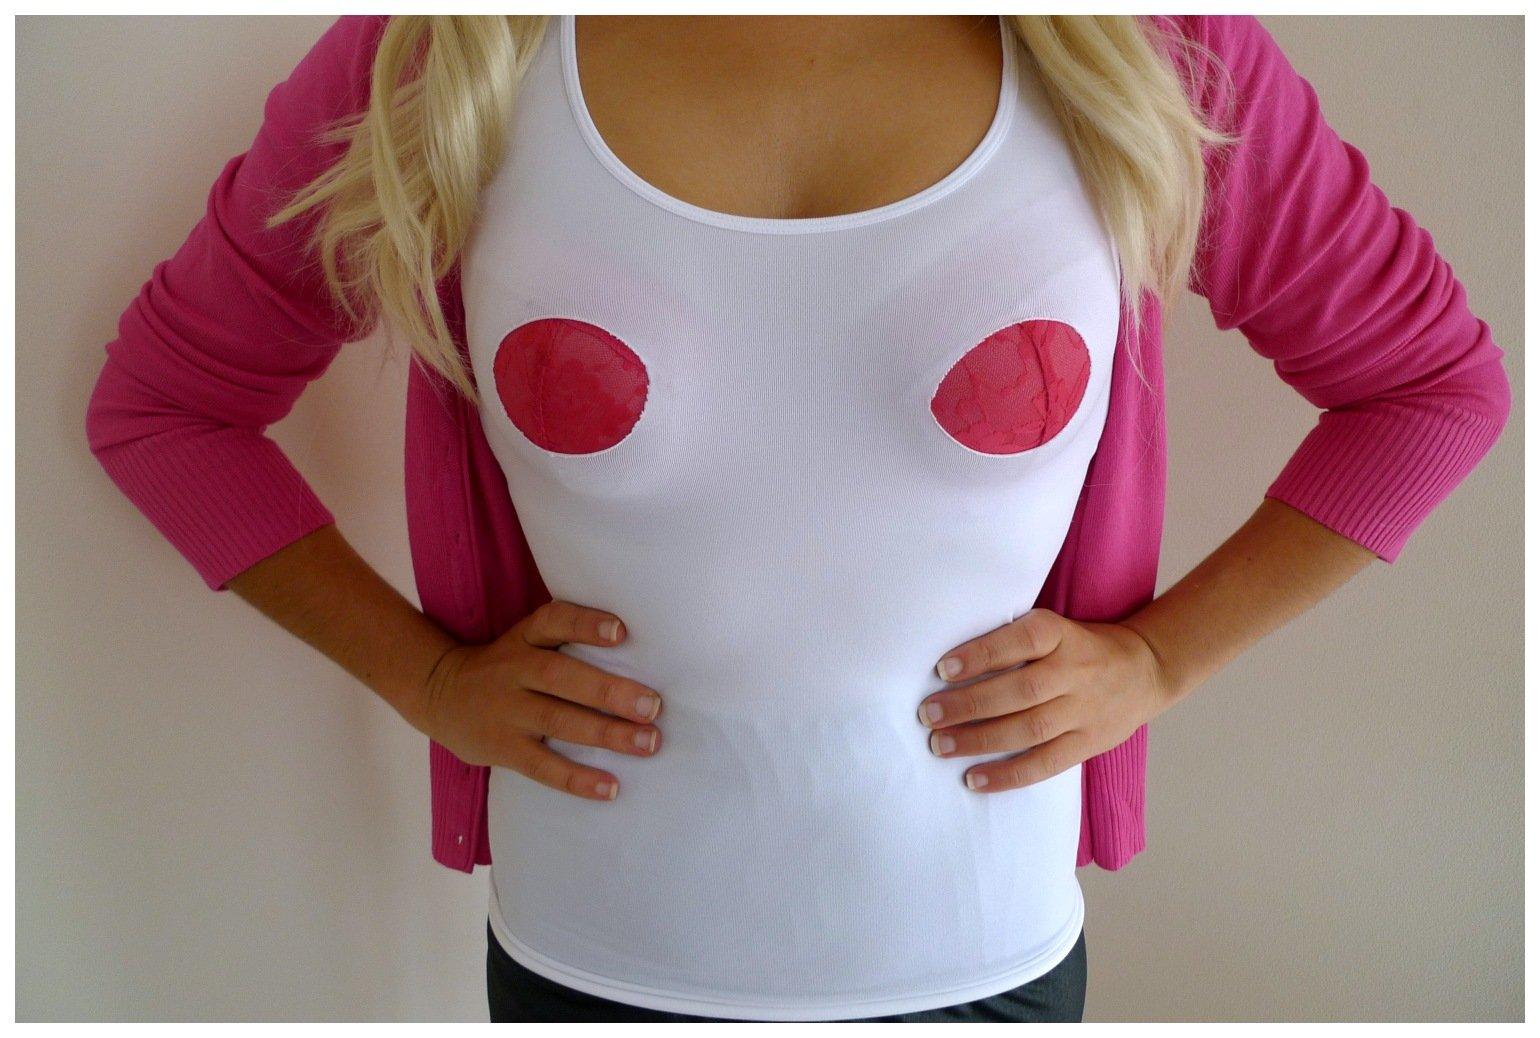 Trigger reccomend Shirt with holes for boobs